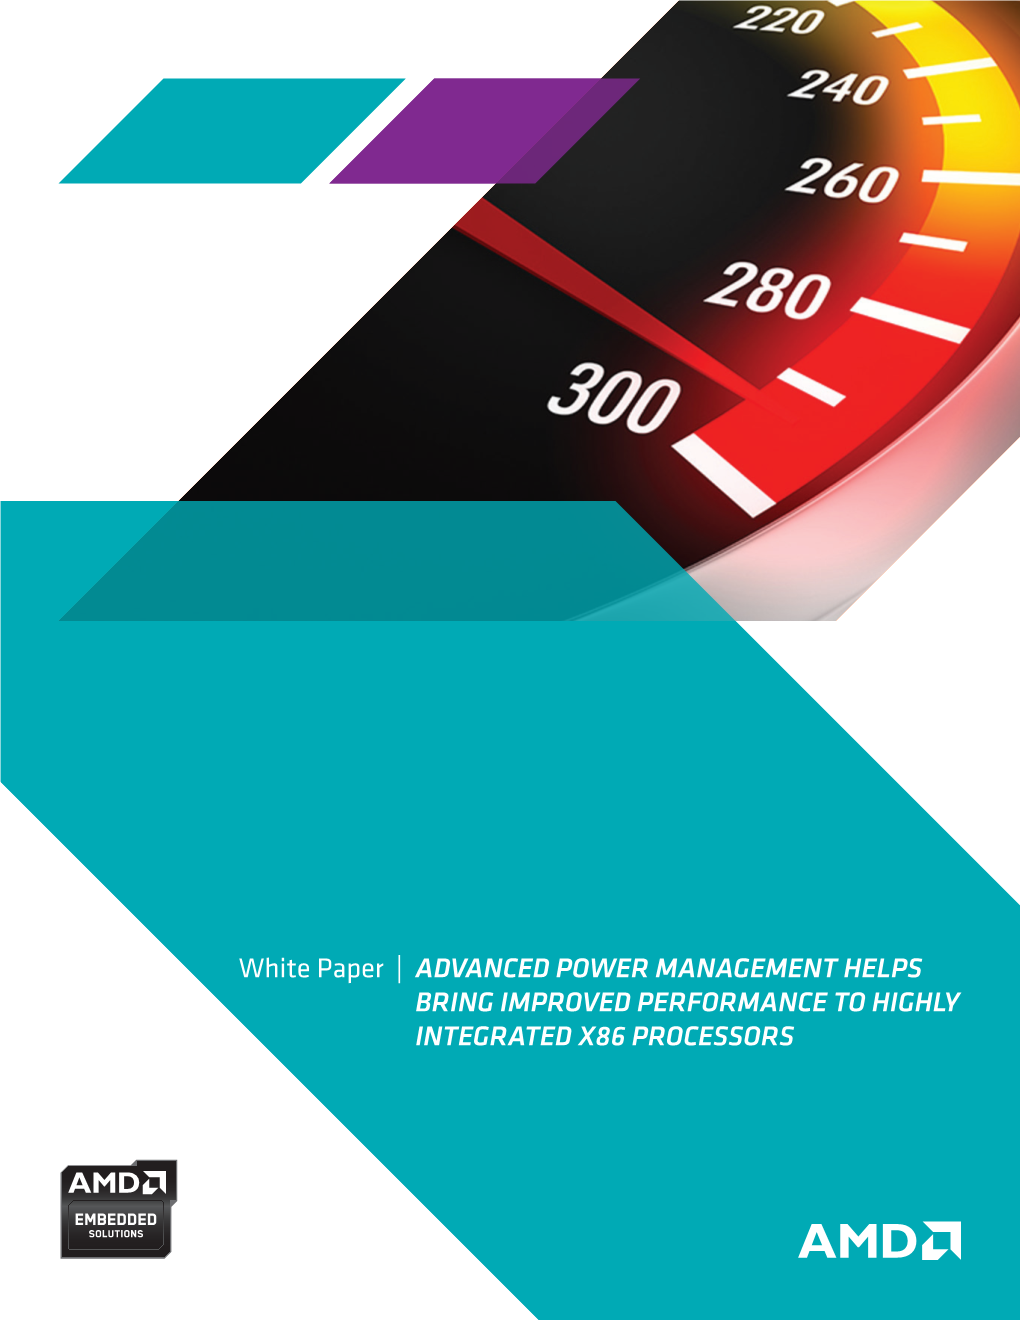 White Paper | ADVANCED POWER MANAGEMENT HELPS BRING